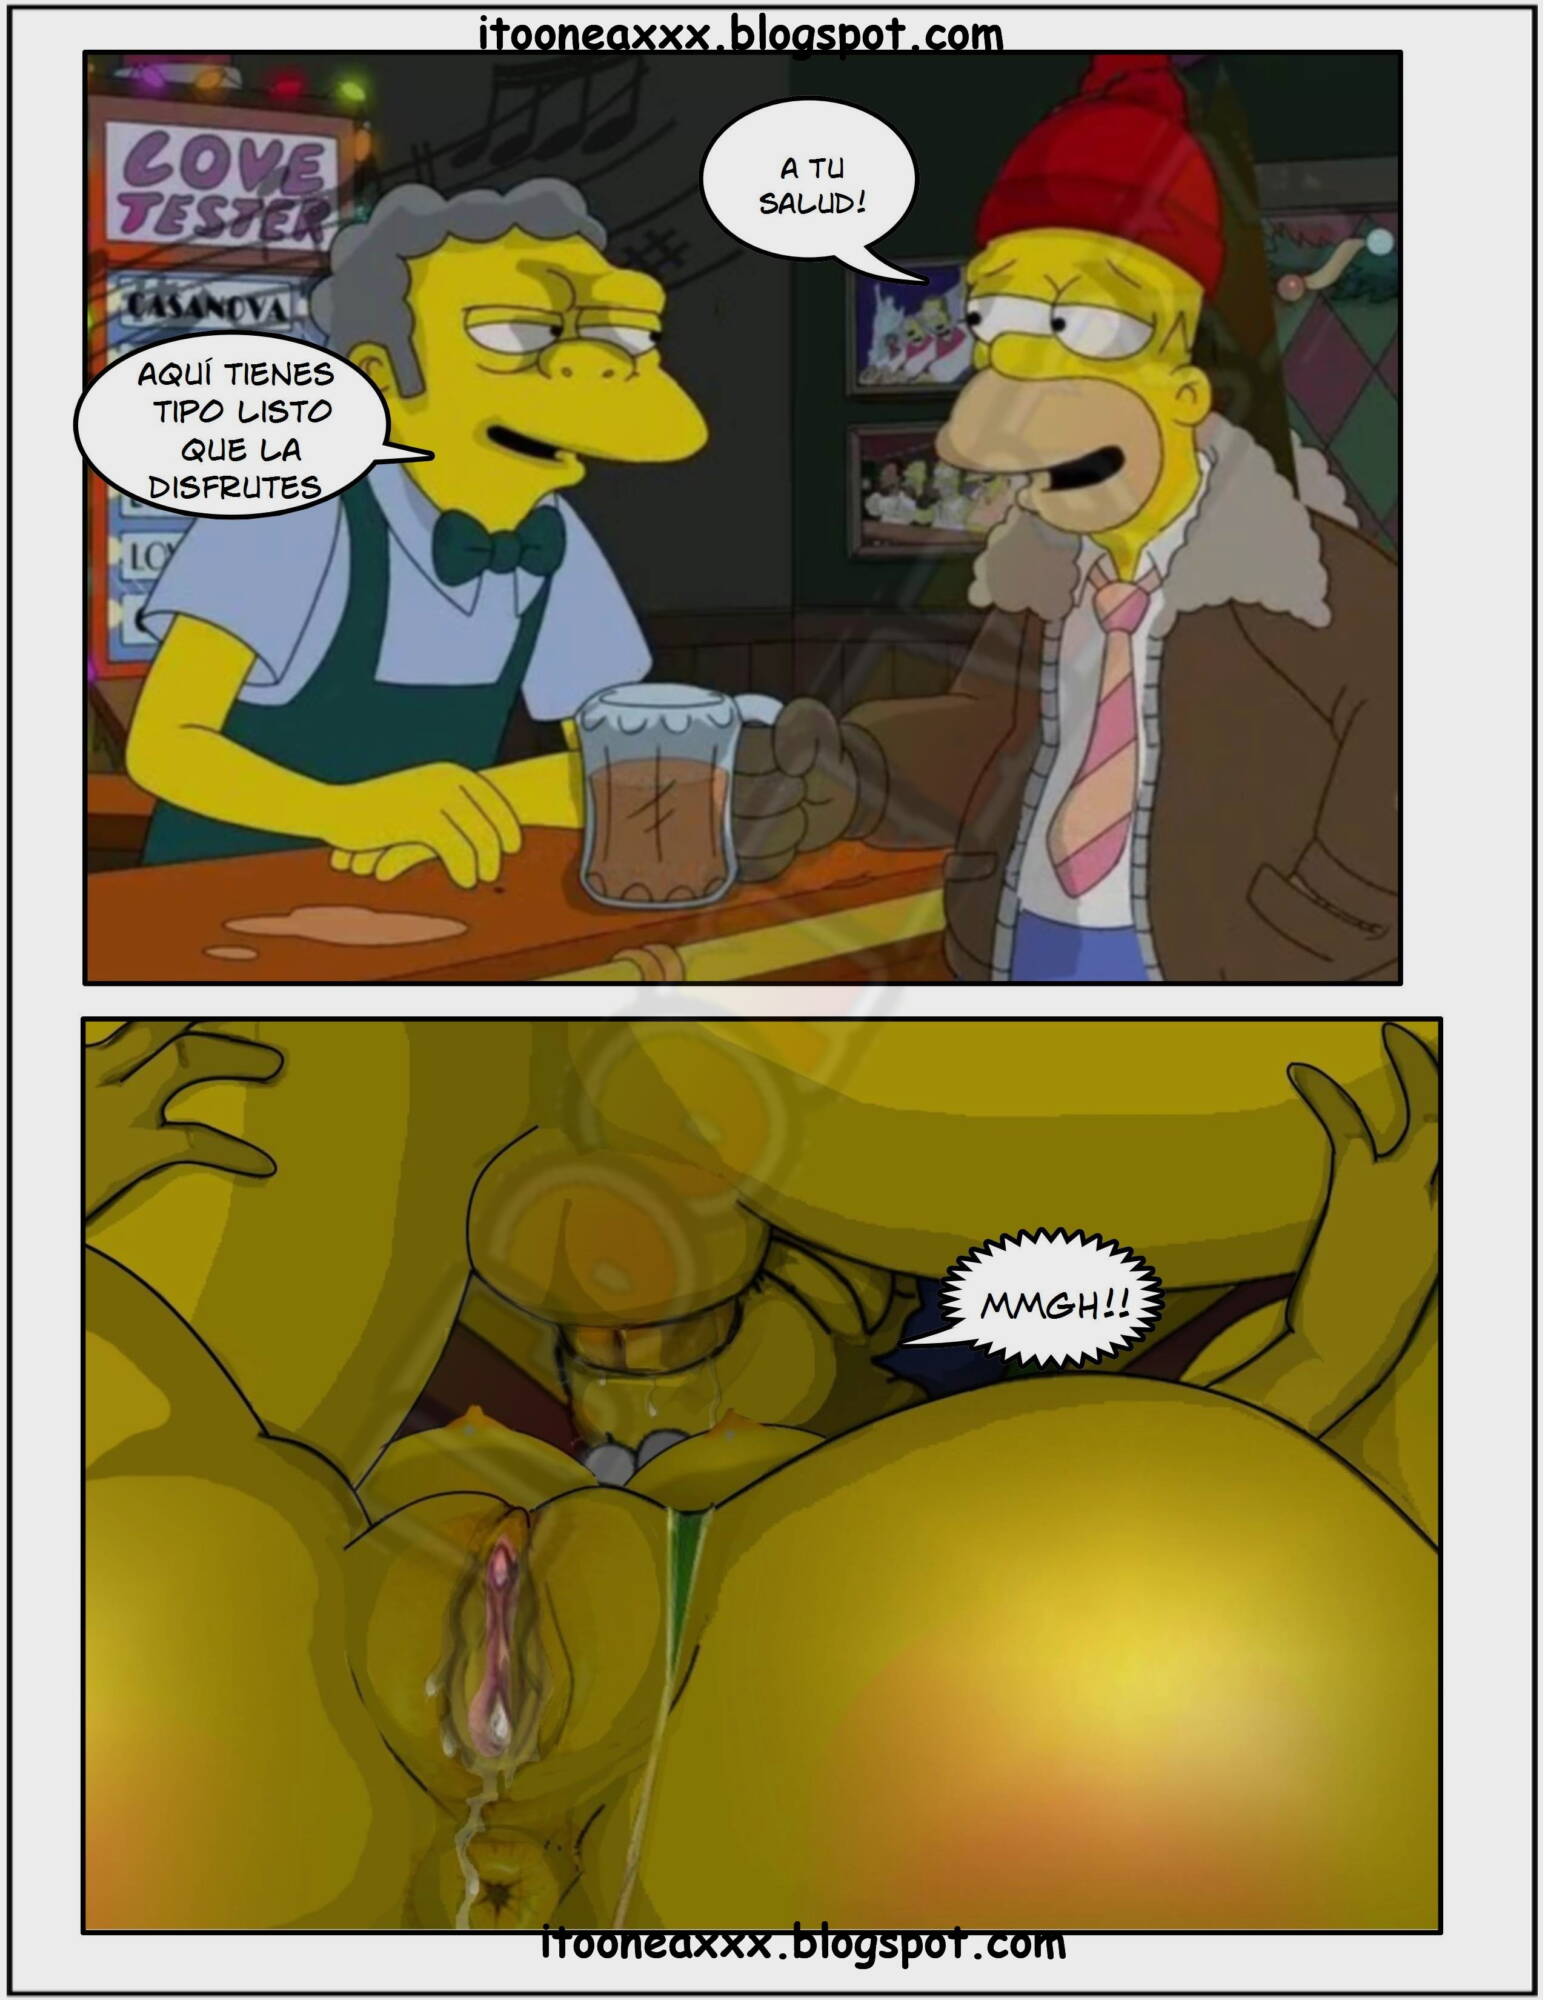 Simpsons Sexy Christmas 1-2 by Itooneaxxx